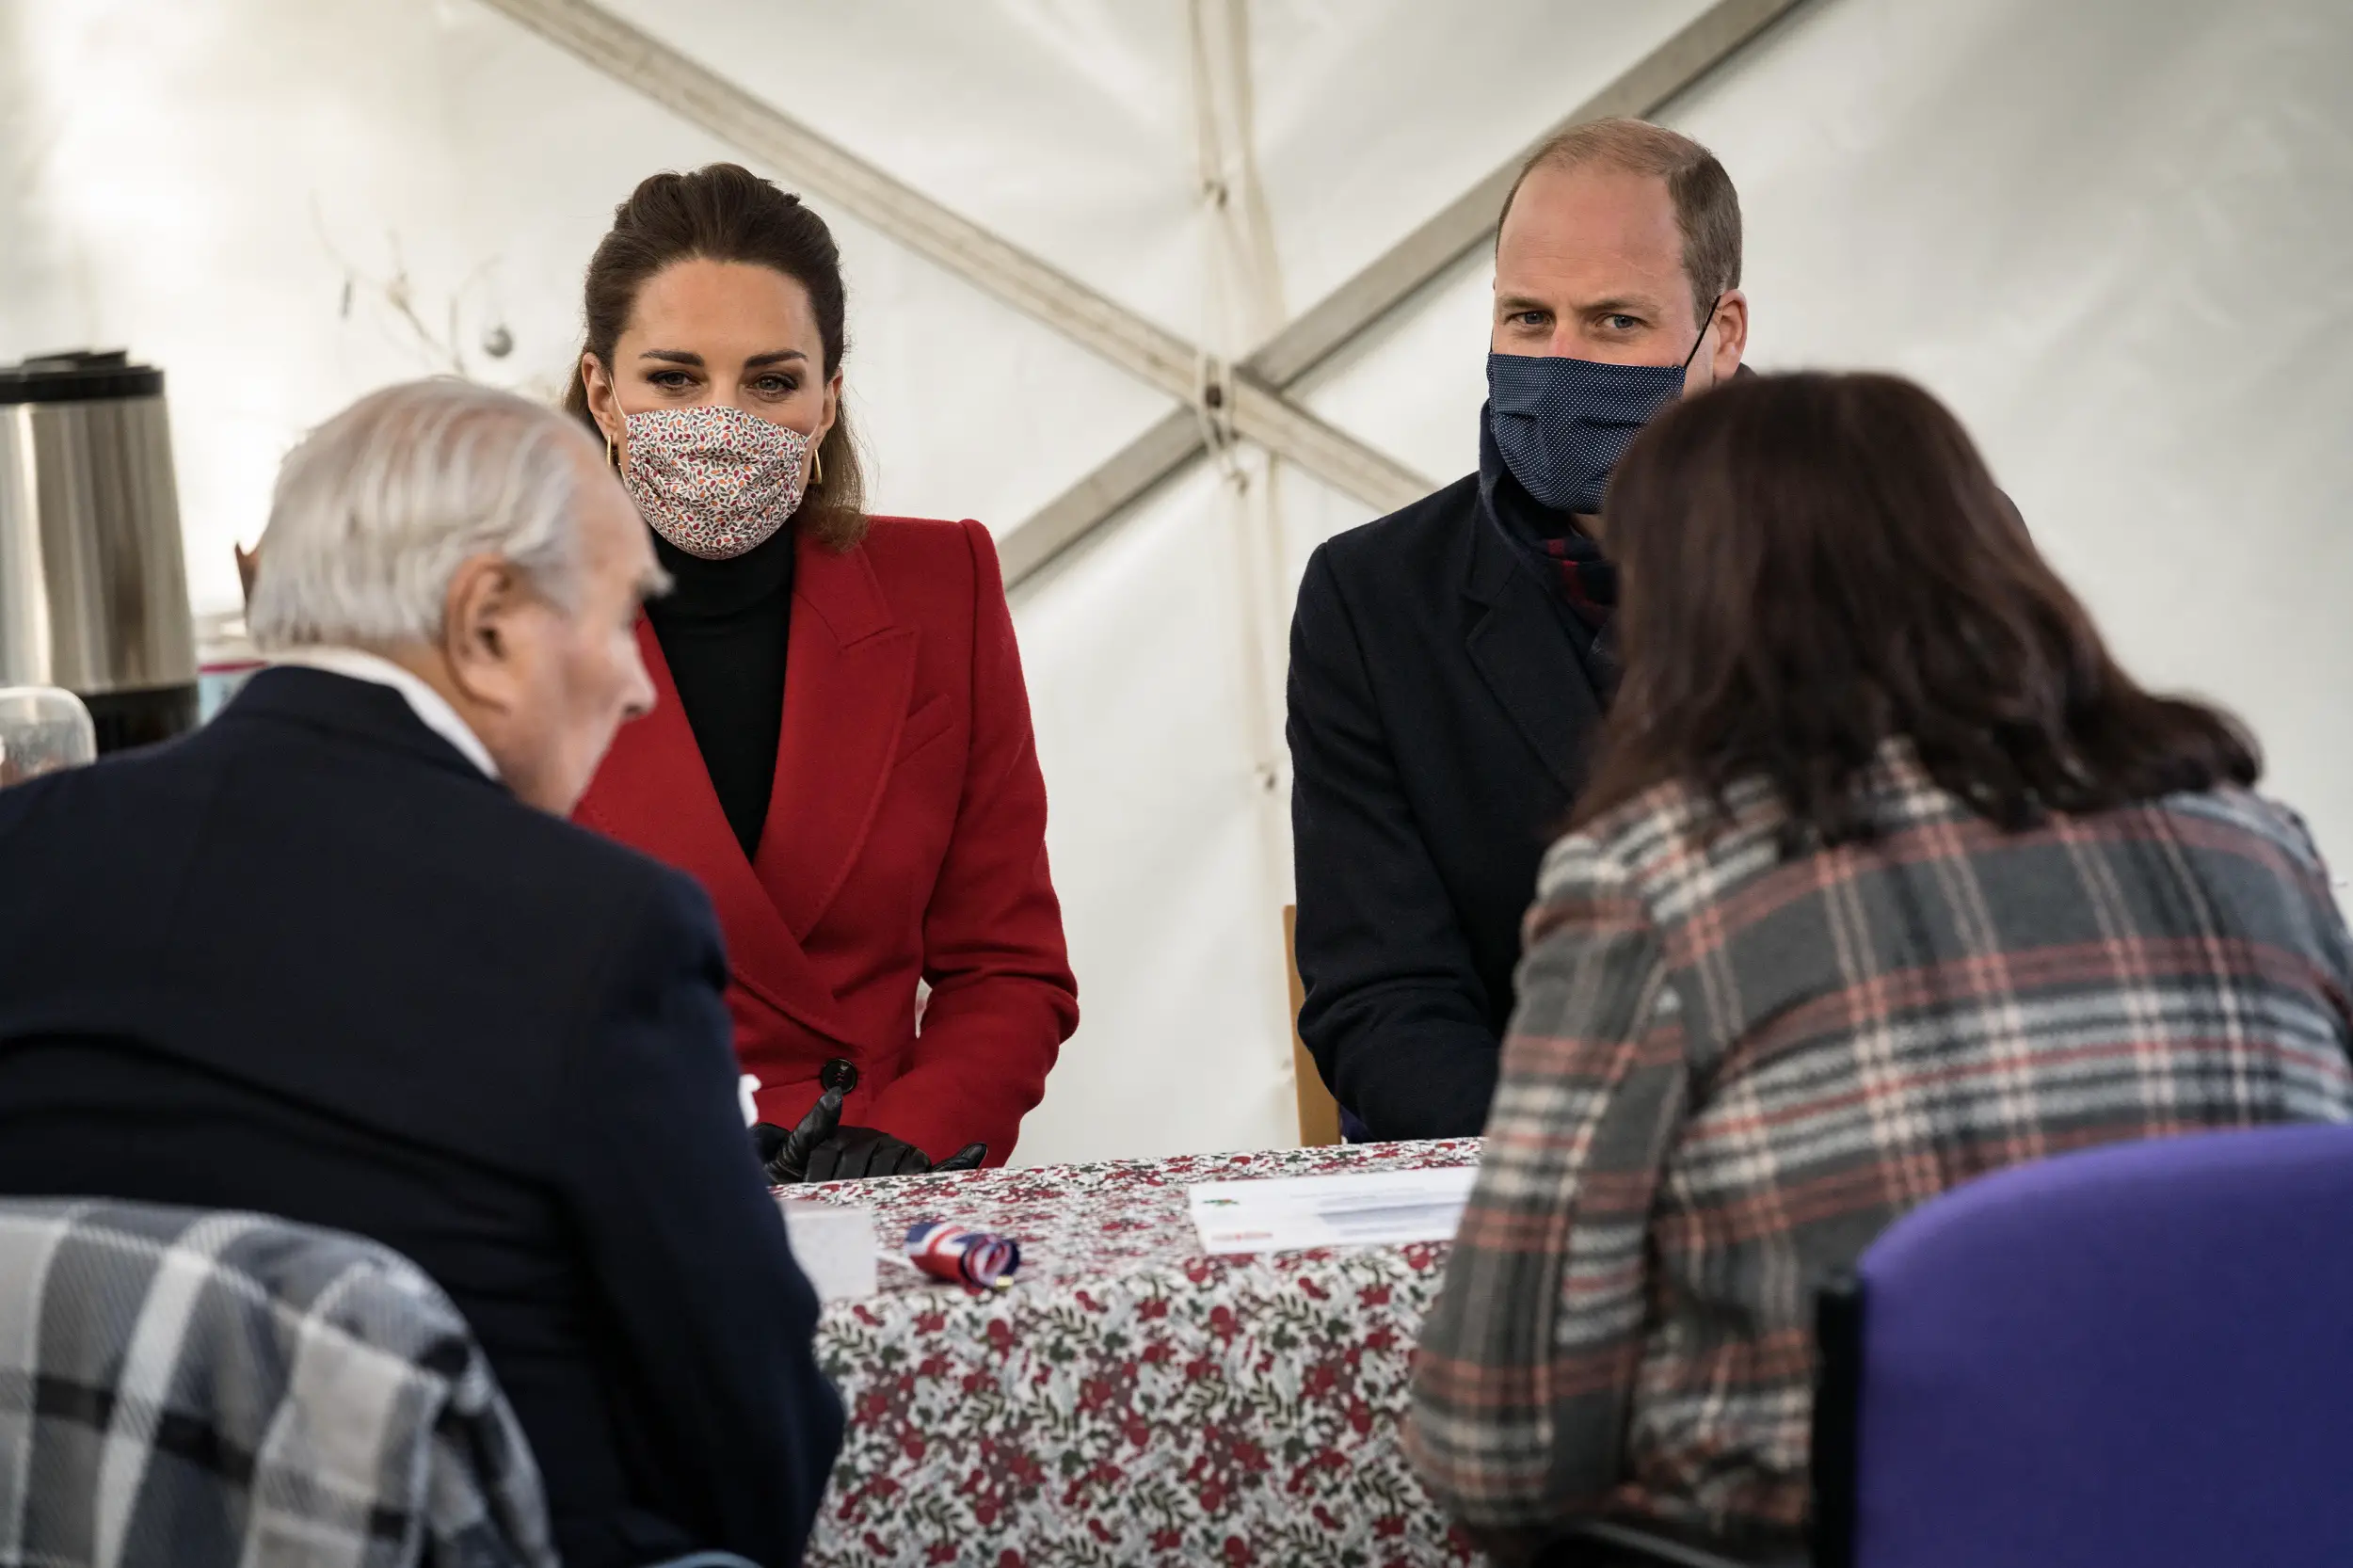 The Duke and Duchess of Cambridge visited Cleeve Care Home in Twerton Bath for the Royal Train Tour